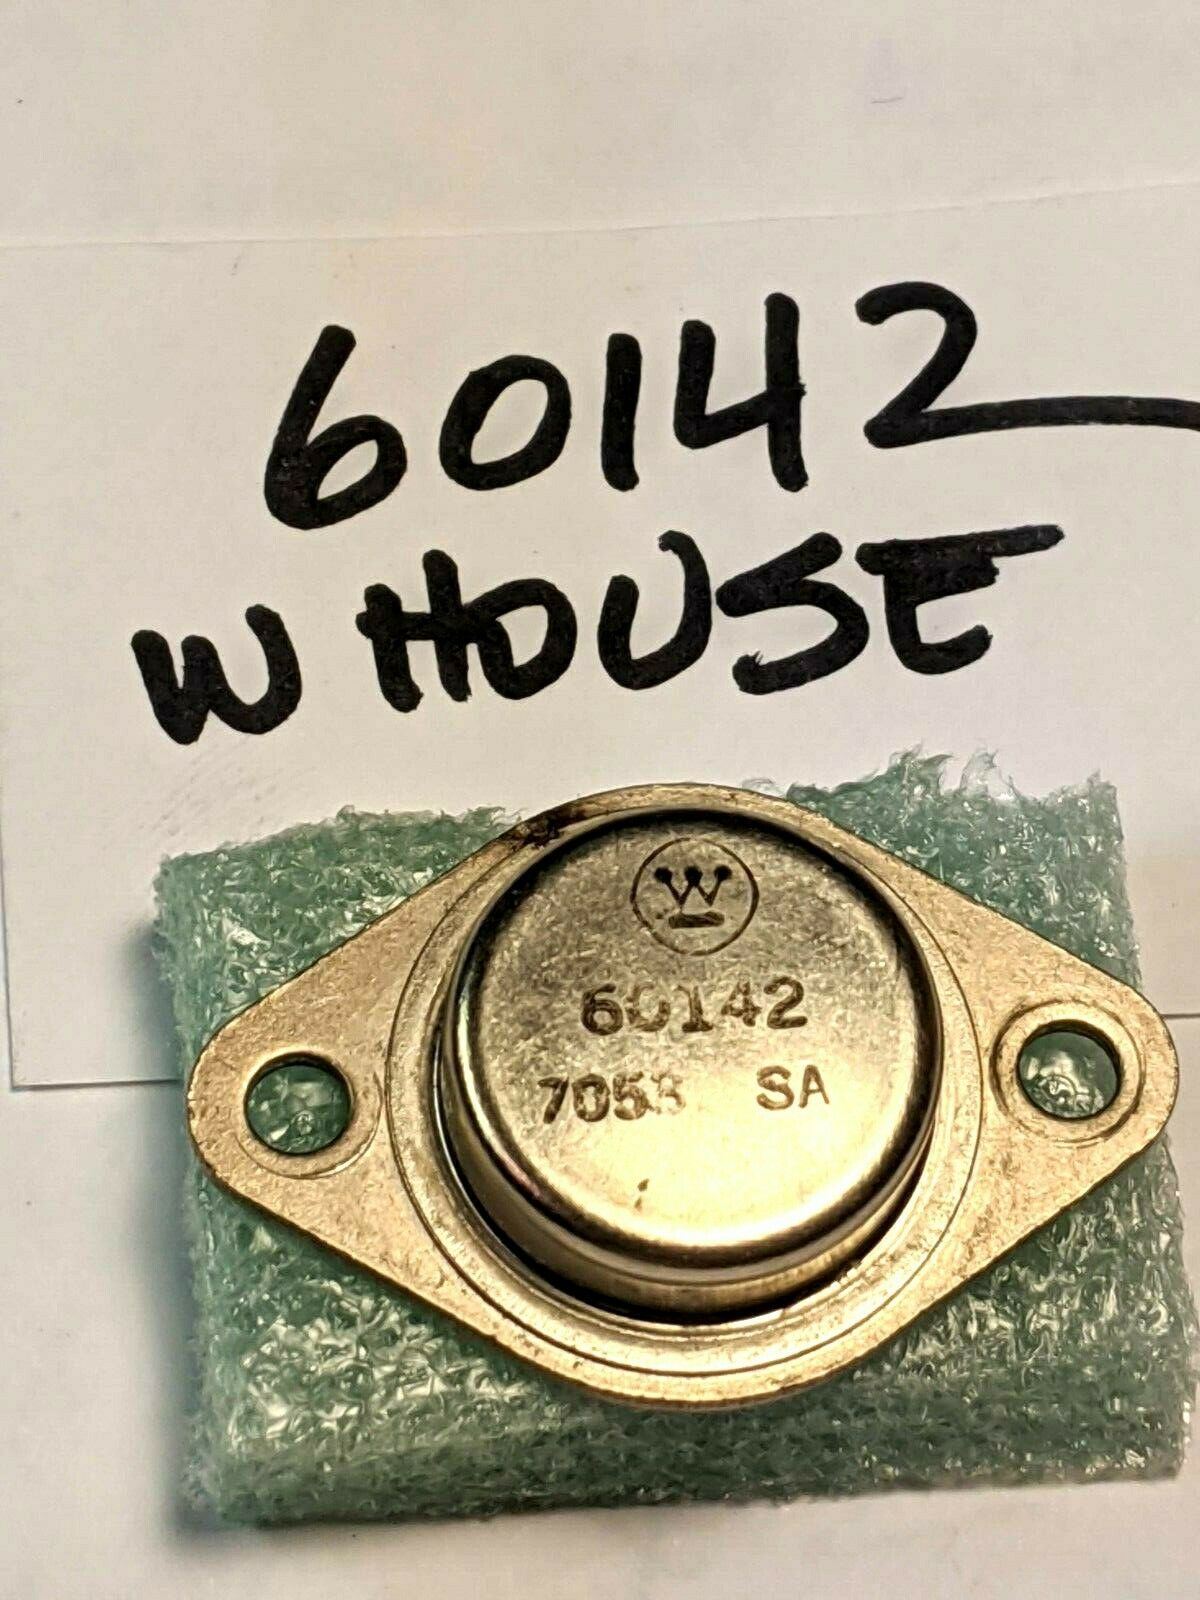 Westinghouse 60142 Transistor, Pullout